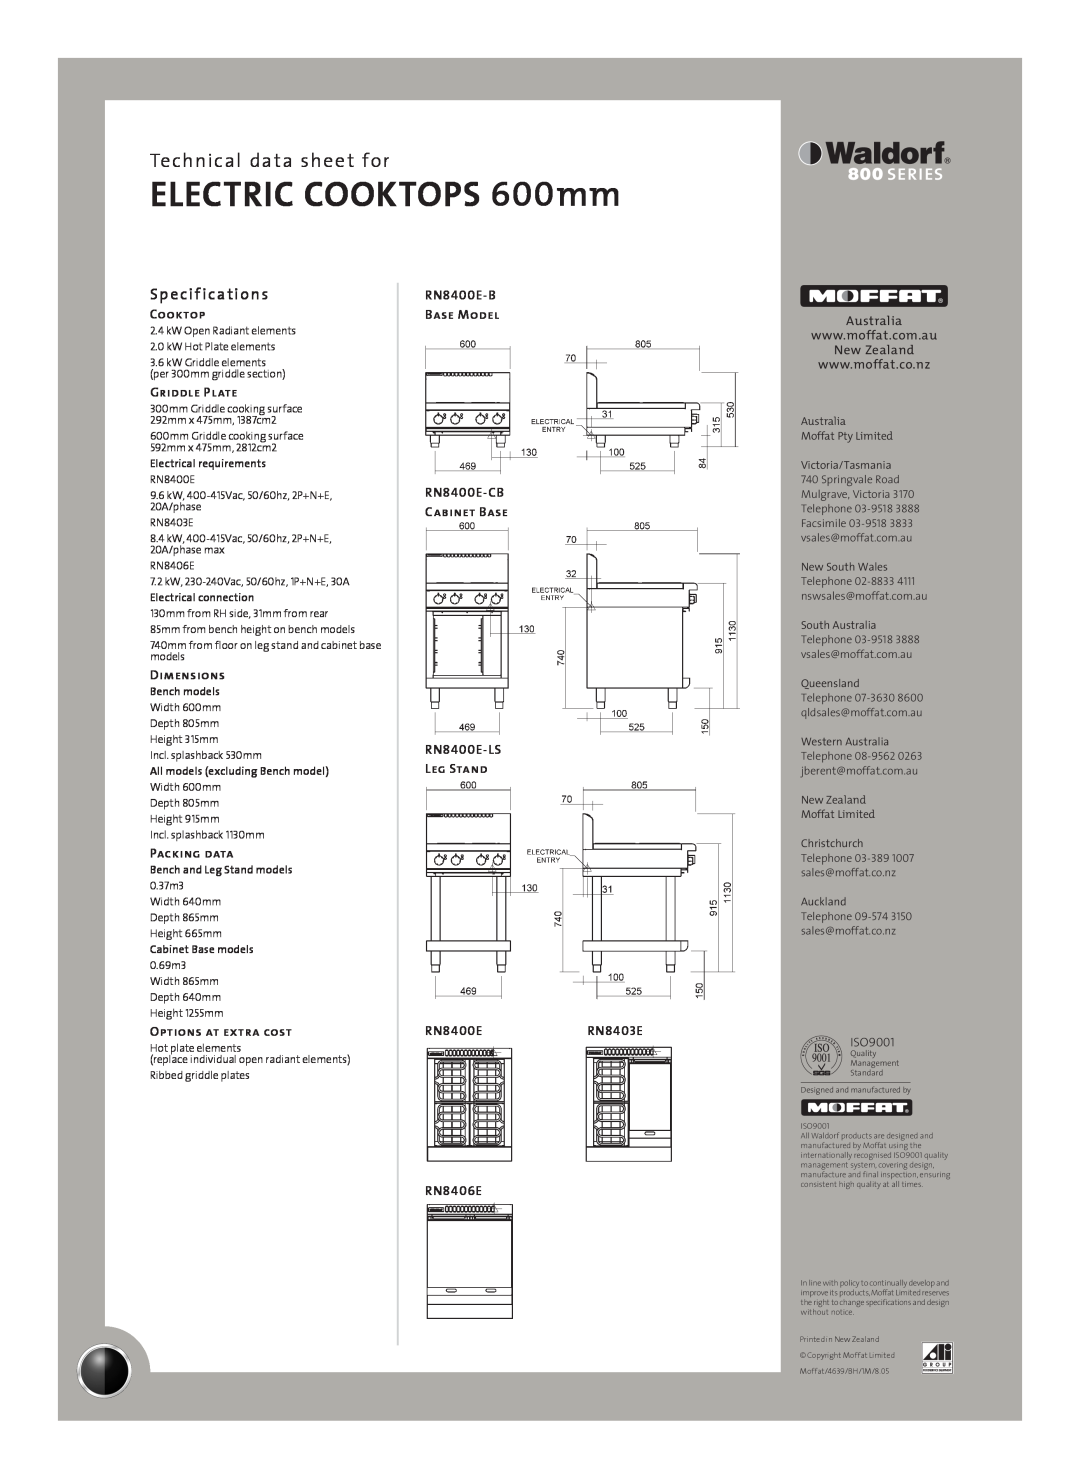 Moffat RN8403E-LS, RN8406E-CB, RN8406E-LS, RN8406E-B Sp e cif ications, ELECTRIC COOKTOPS 600mm, Technical data sheet for 